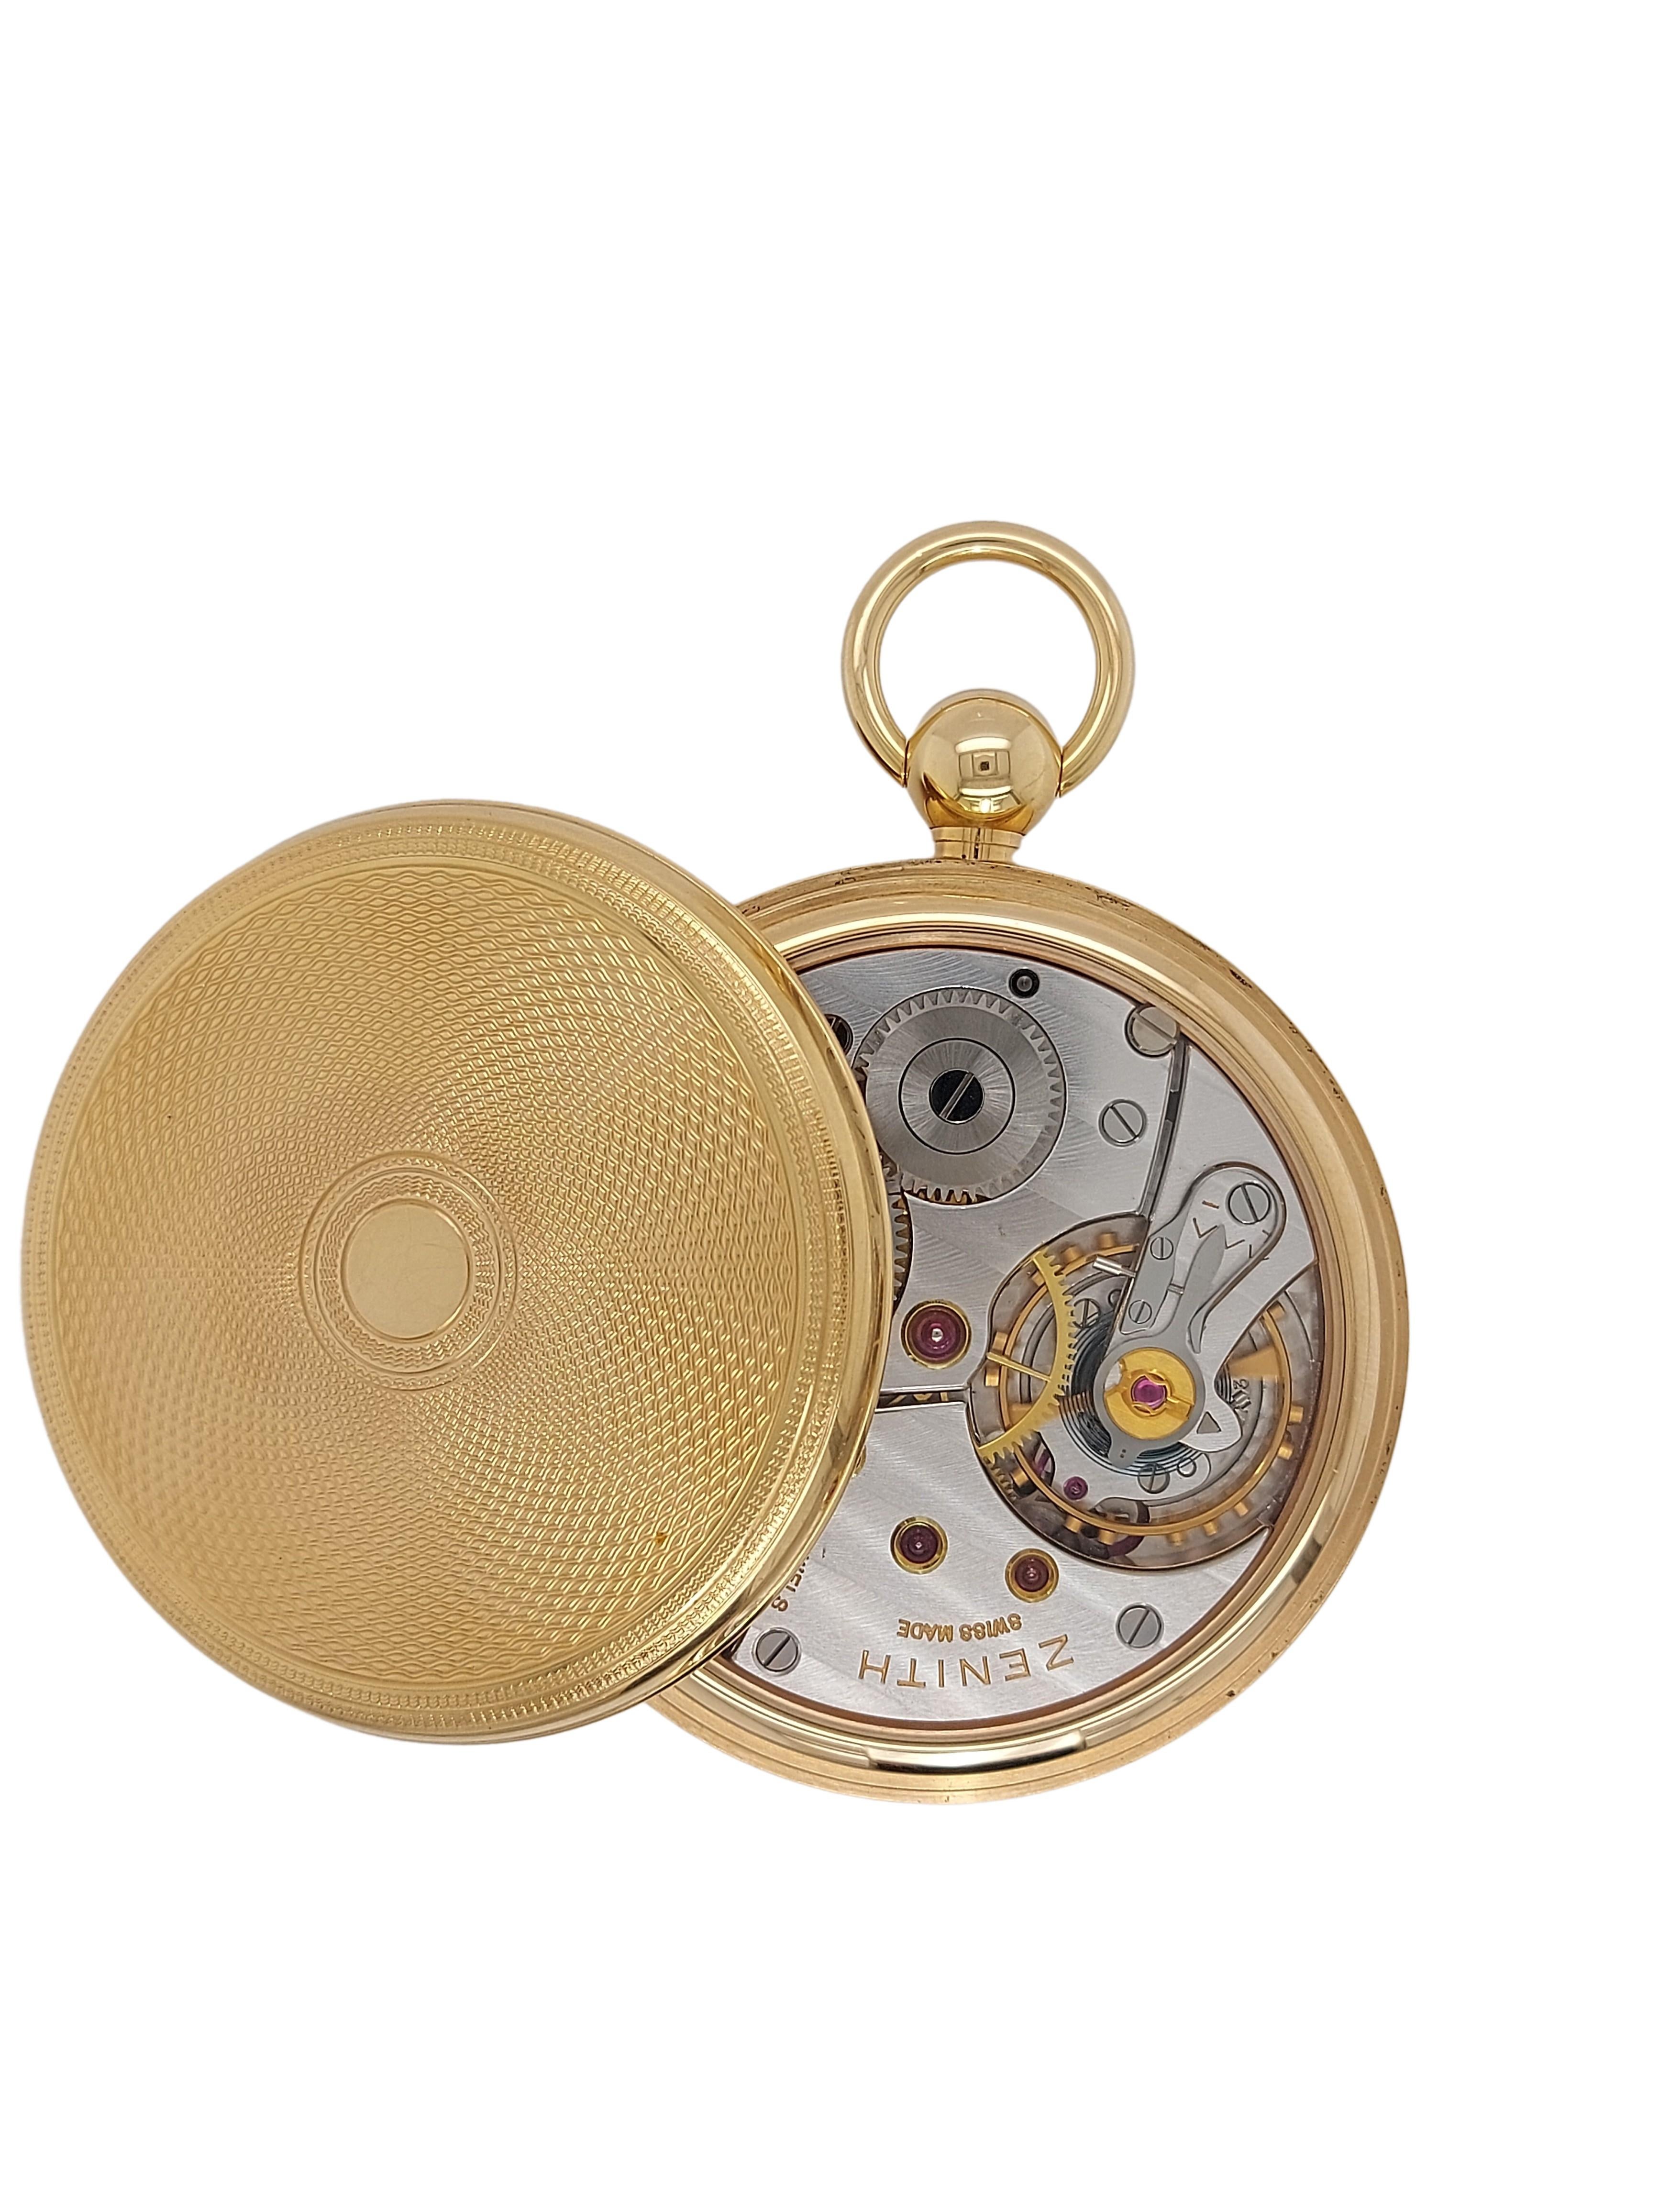 18kt Rose Zenith Open Face Pocket Watch Thomas Engel No° 9 with Box & Papers! For Sale 6